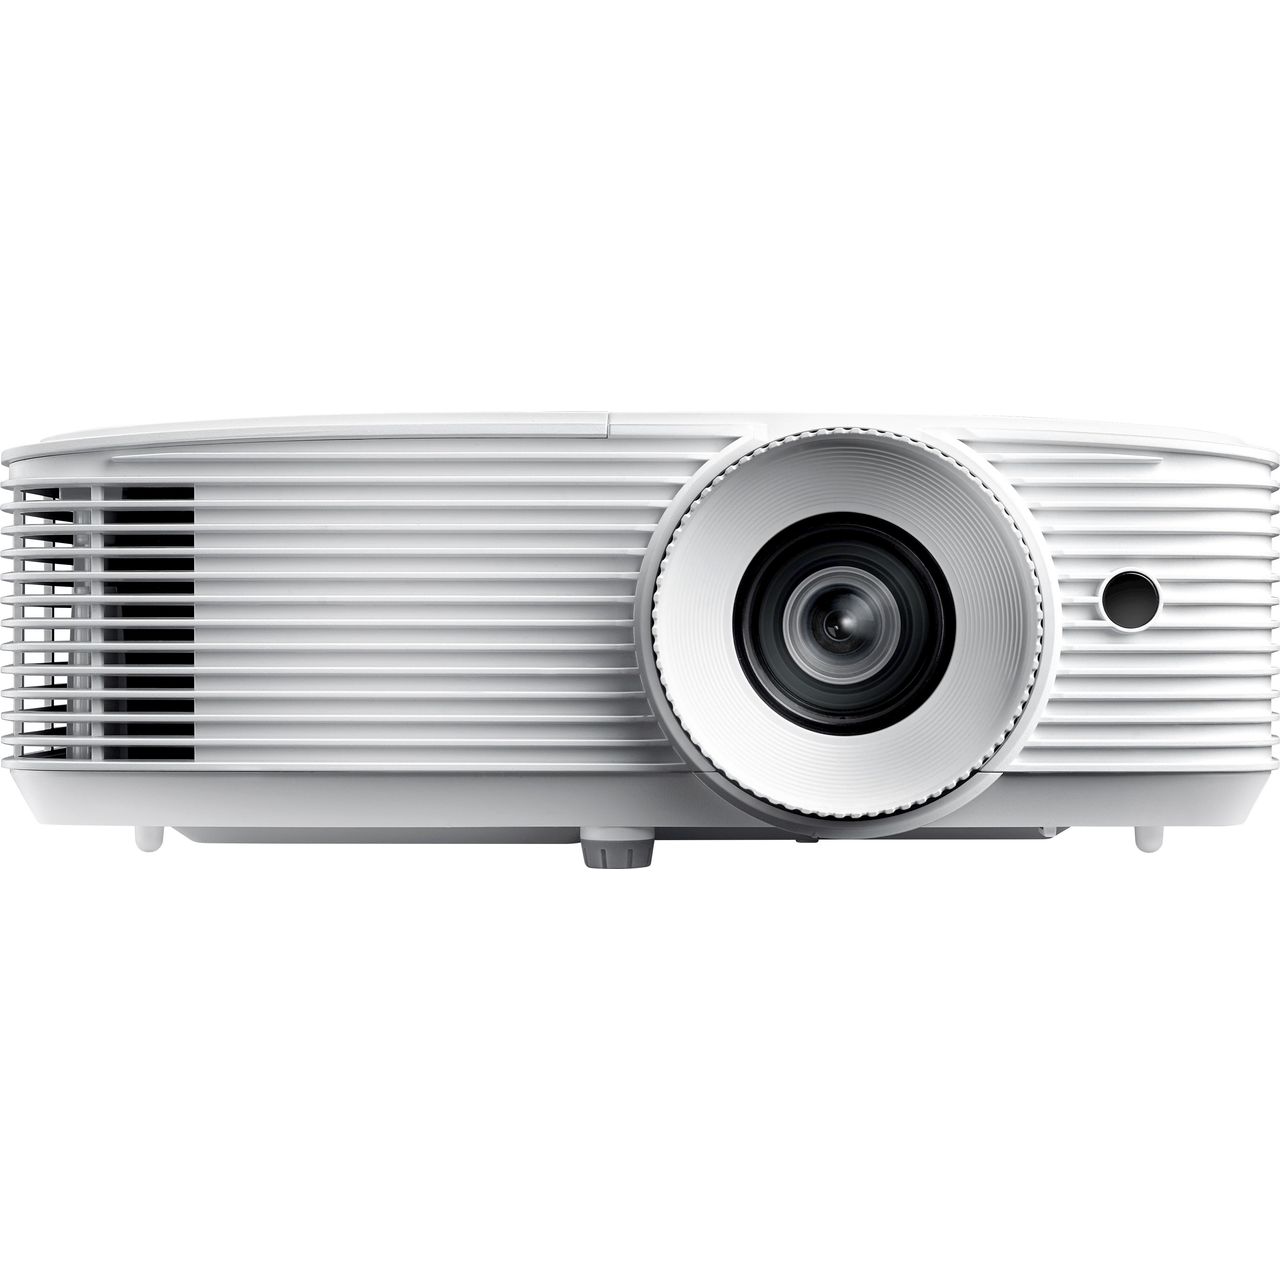 Optoma HD29He Projector 1080p Full HD Review